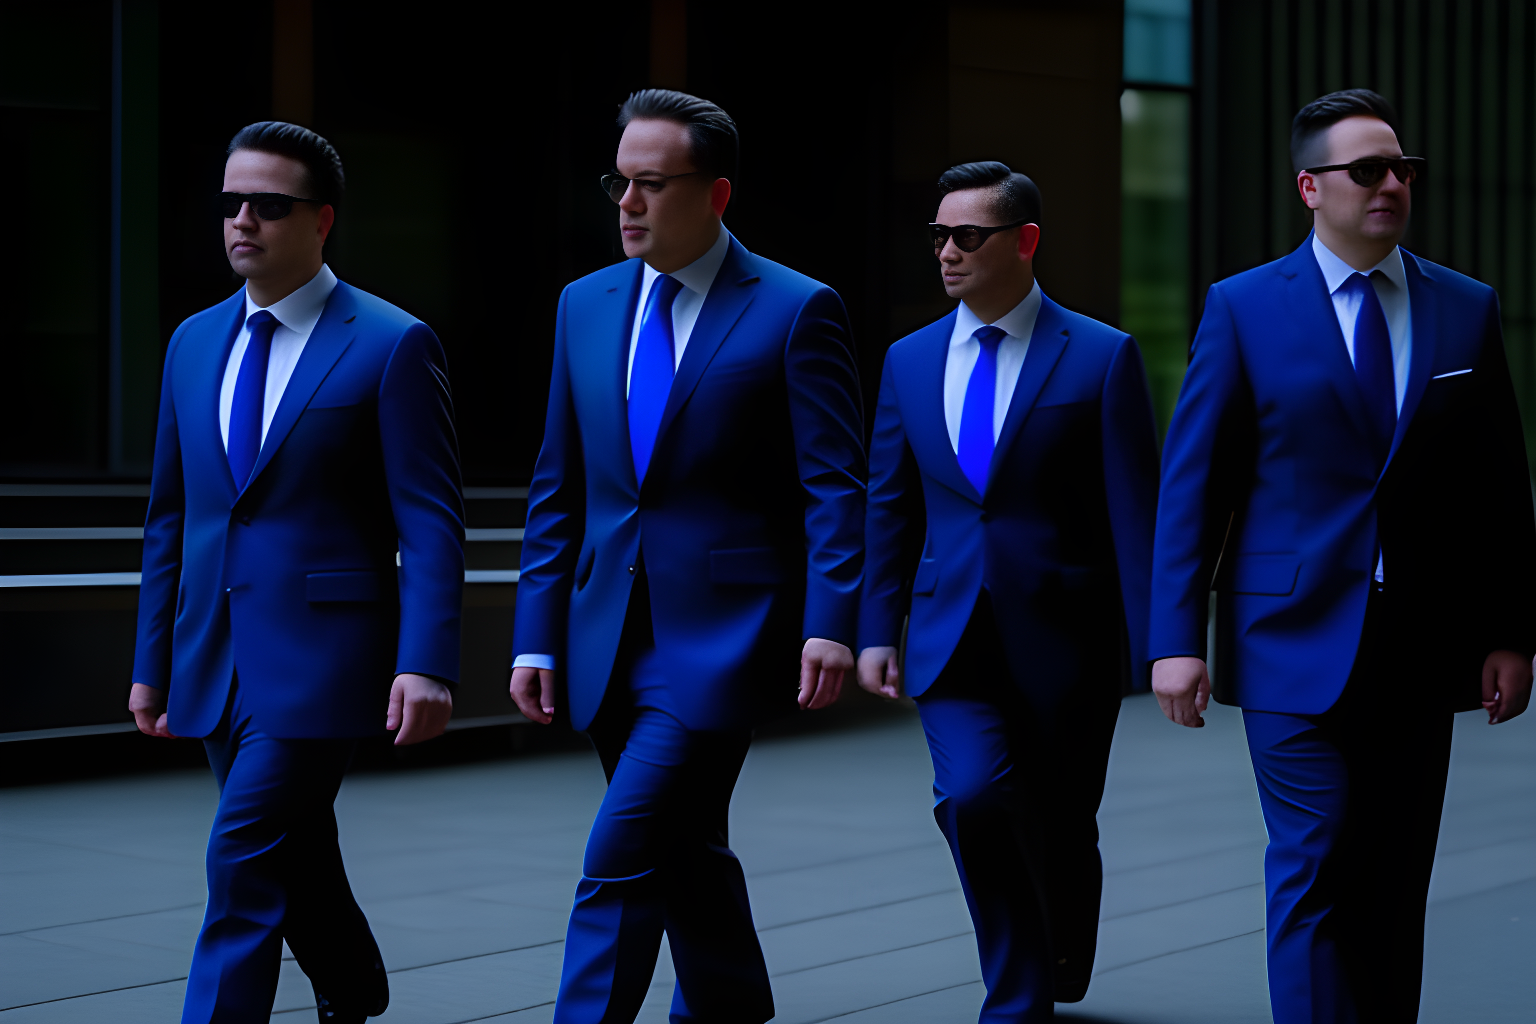 lawyers in suits walking in slow motion